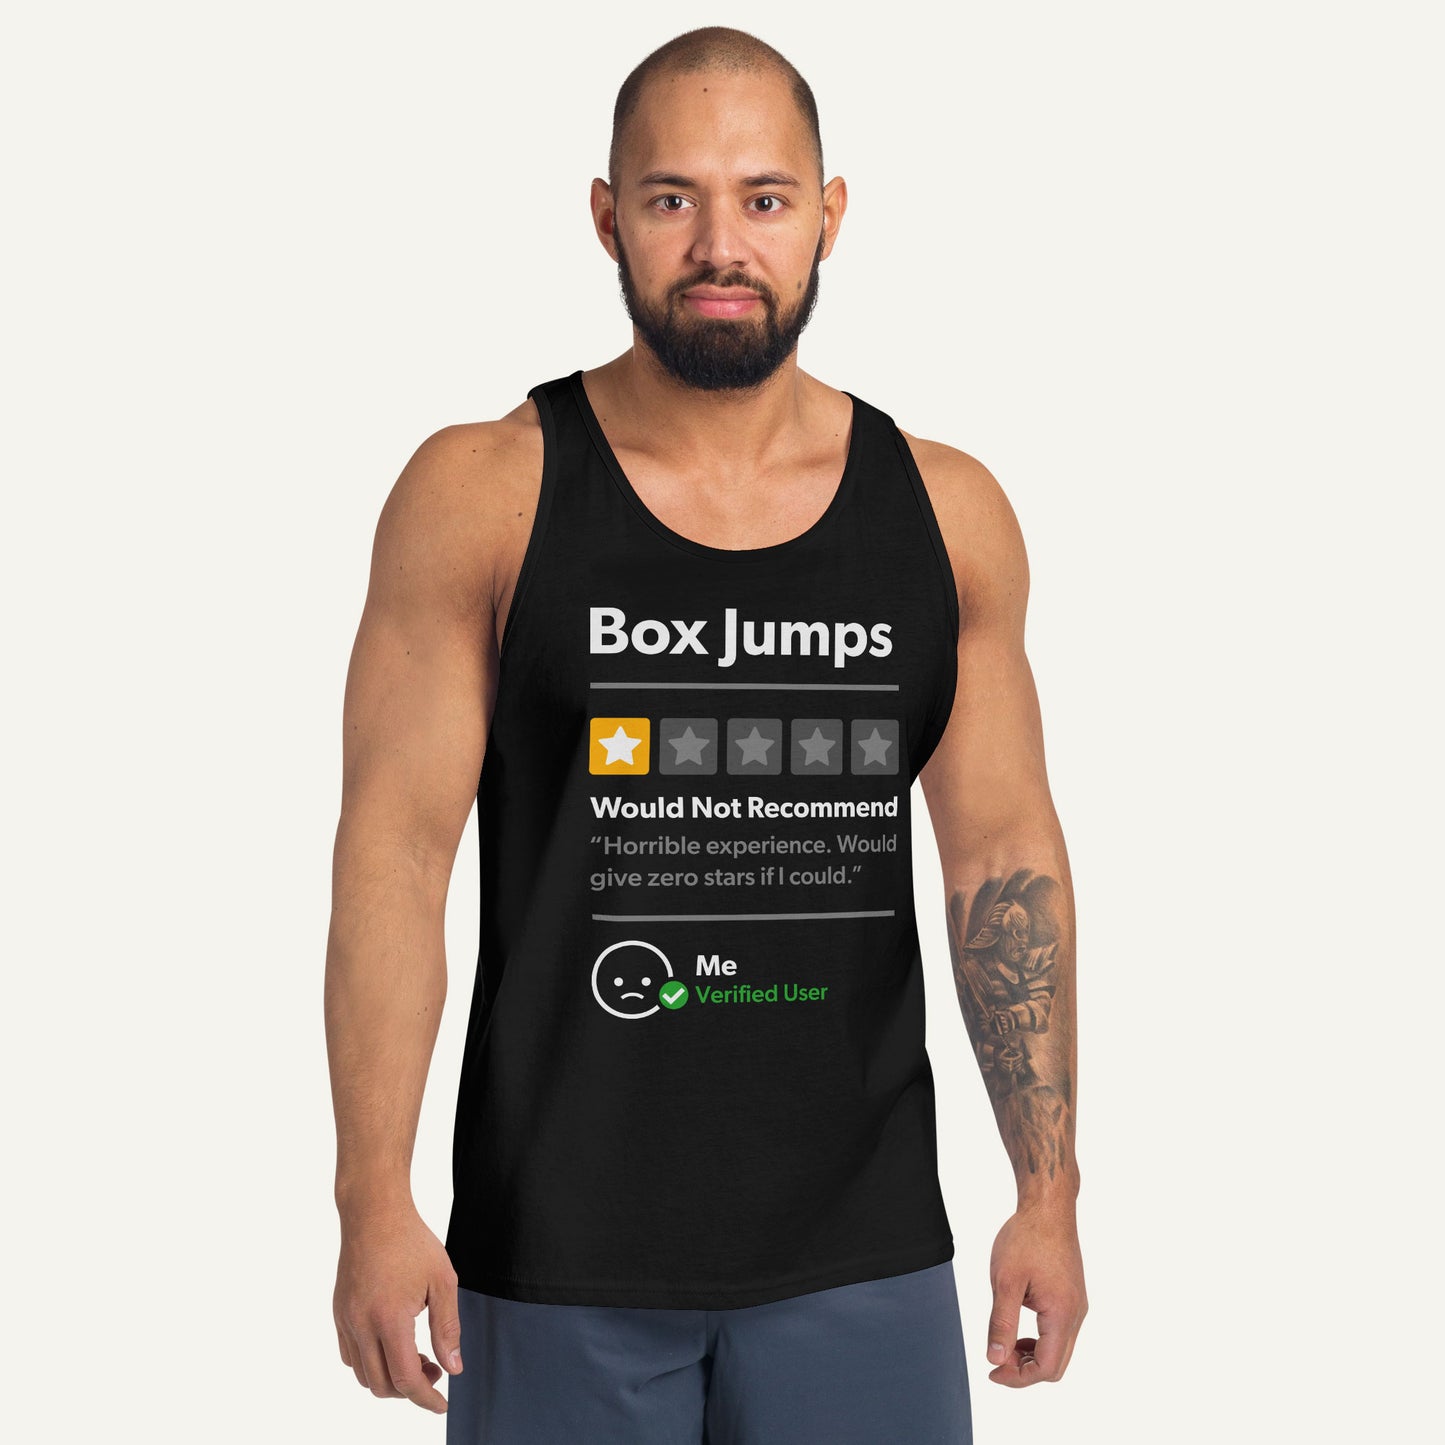 Box Jumps 1 Star Would Not Recommend Men’s Tank Top